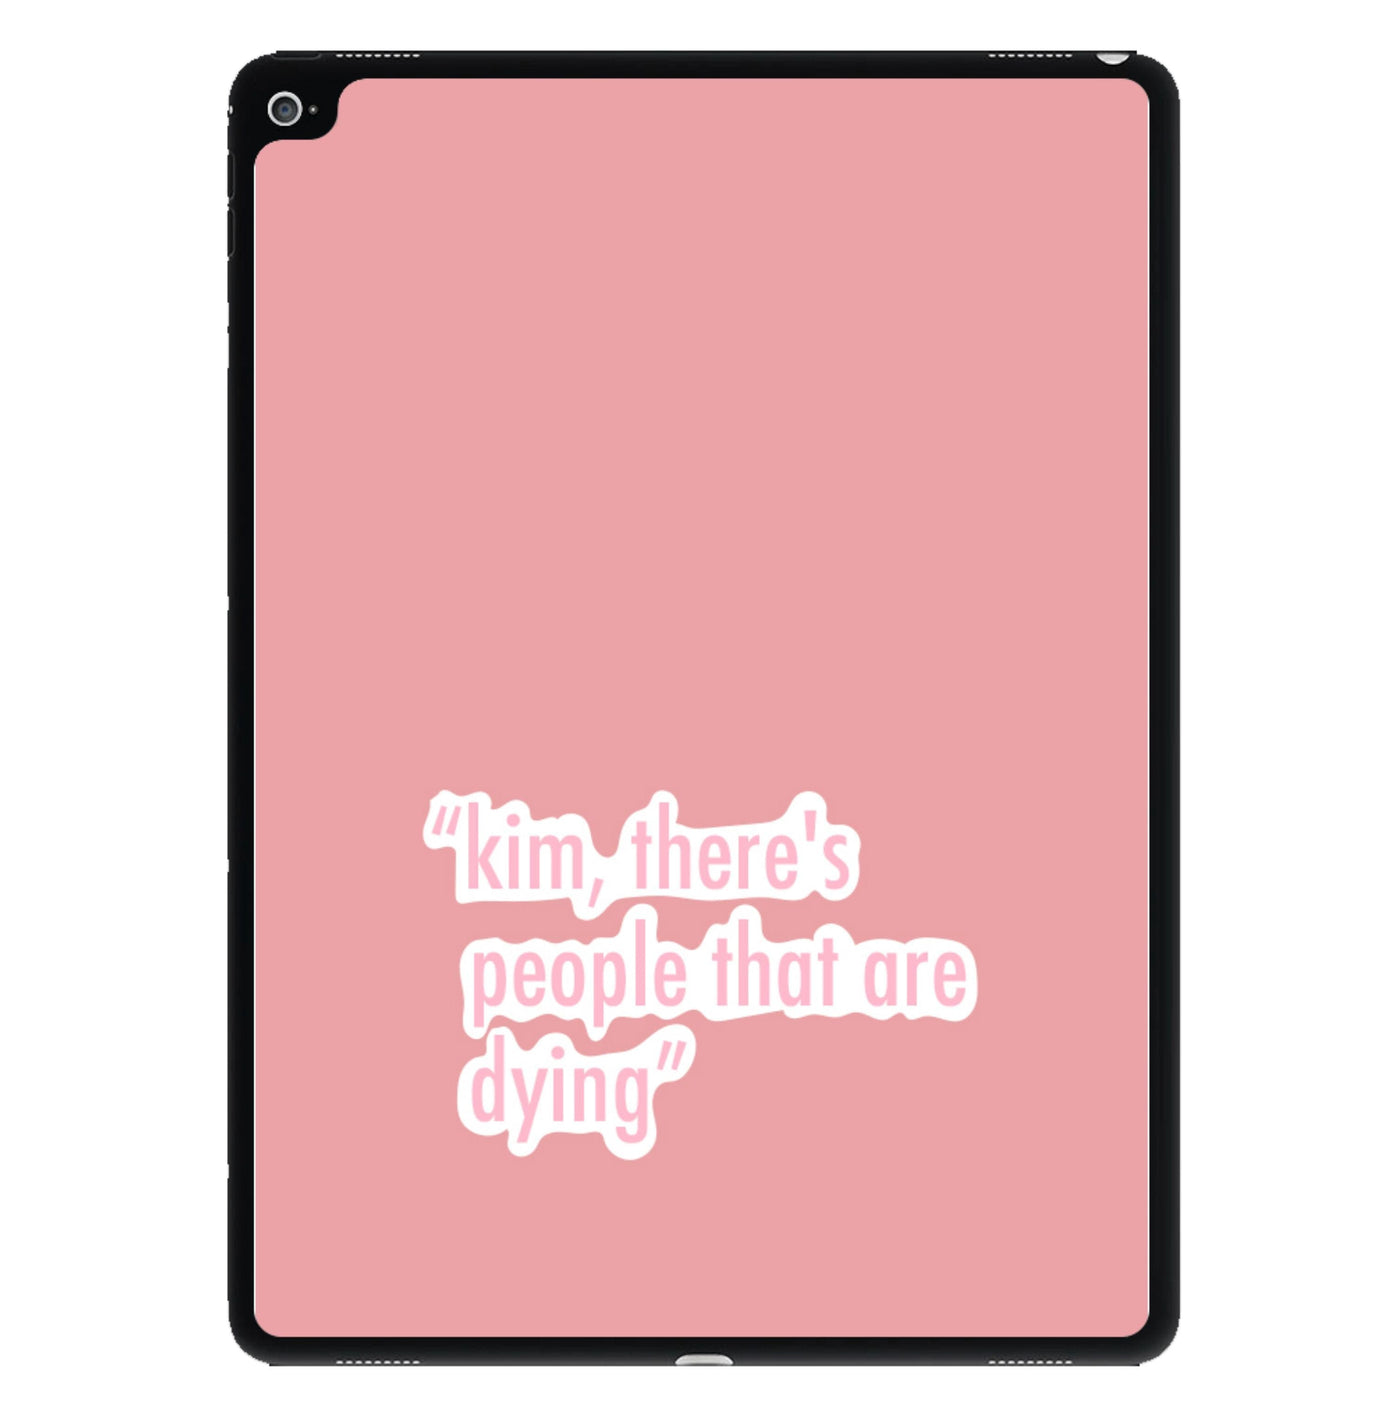 Kim, There's People That Are Dying - Kardashian iPad Case